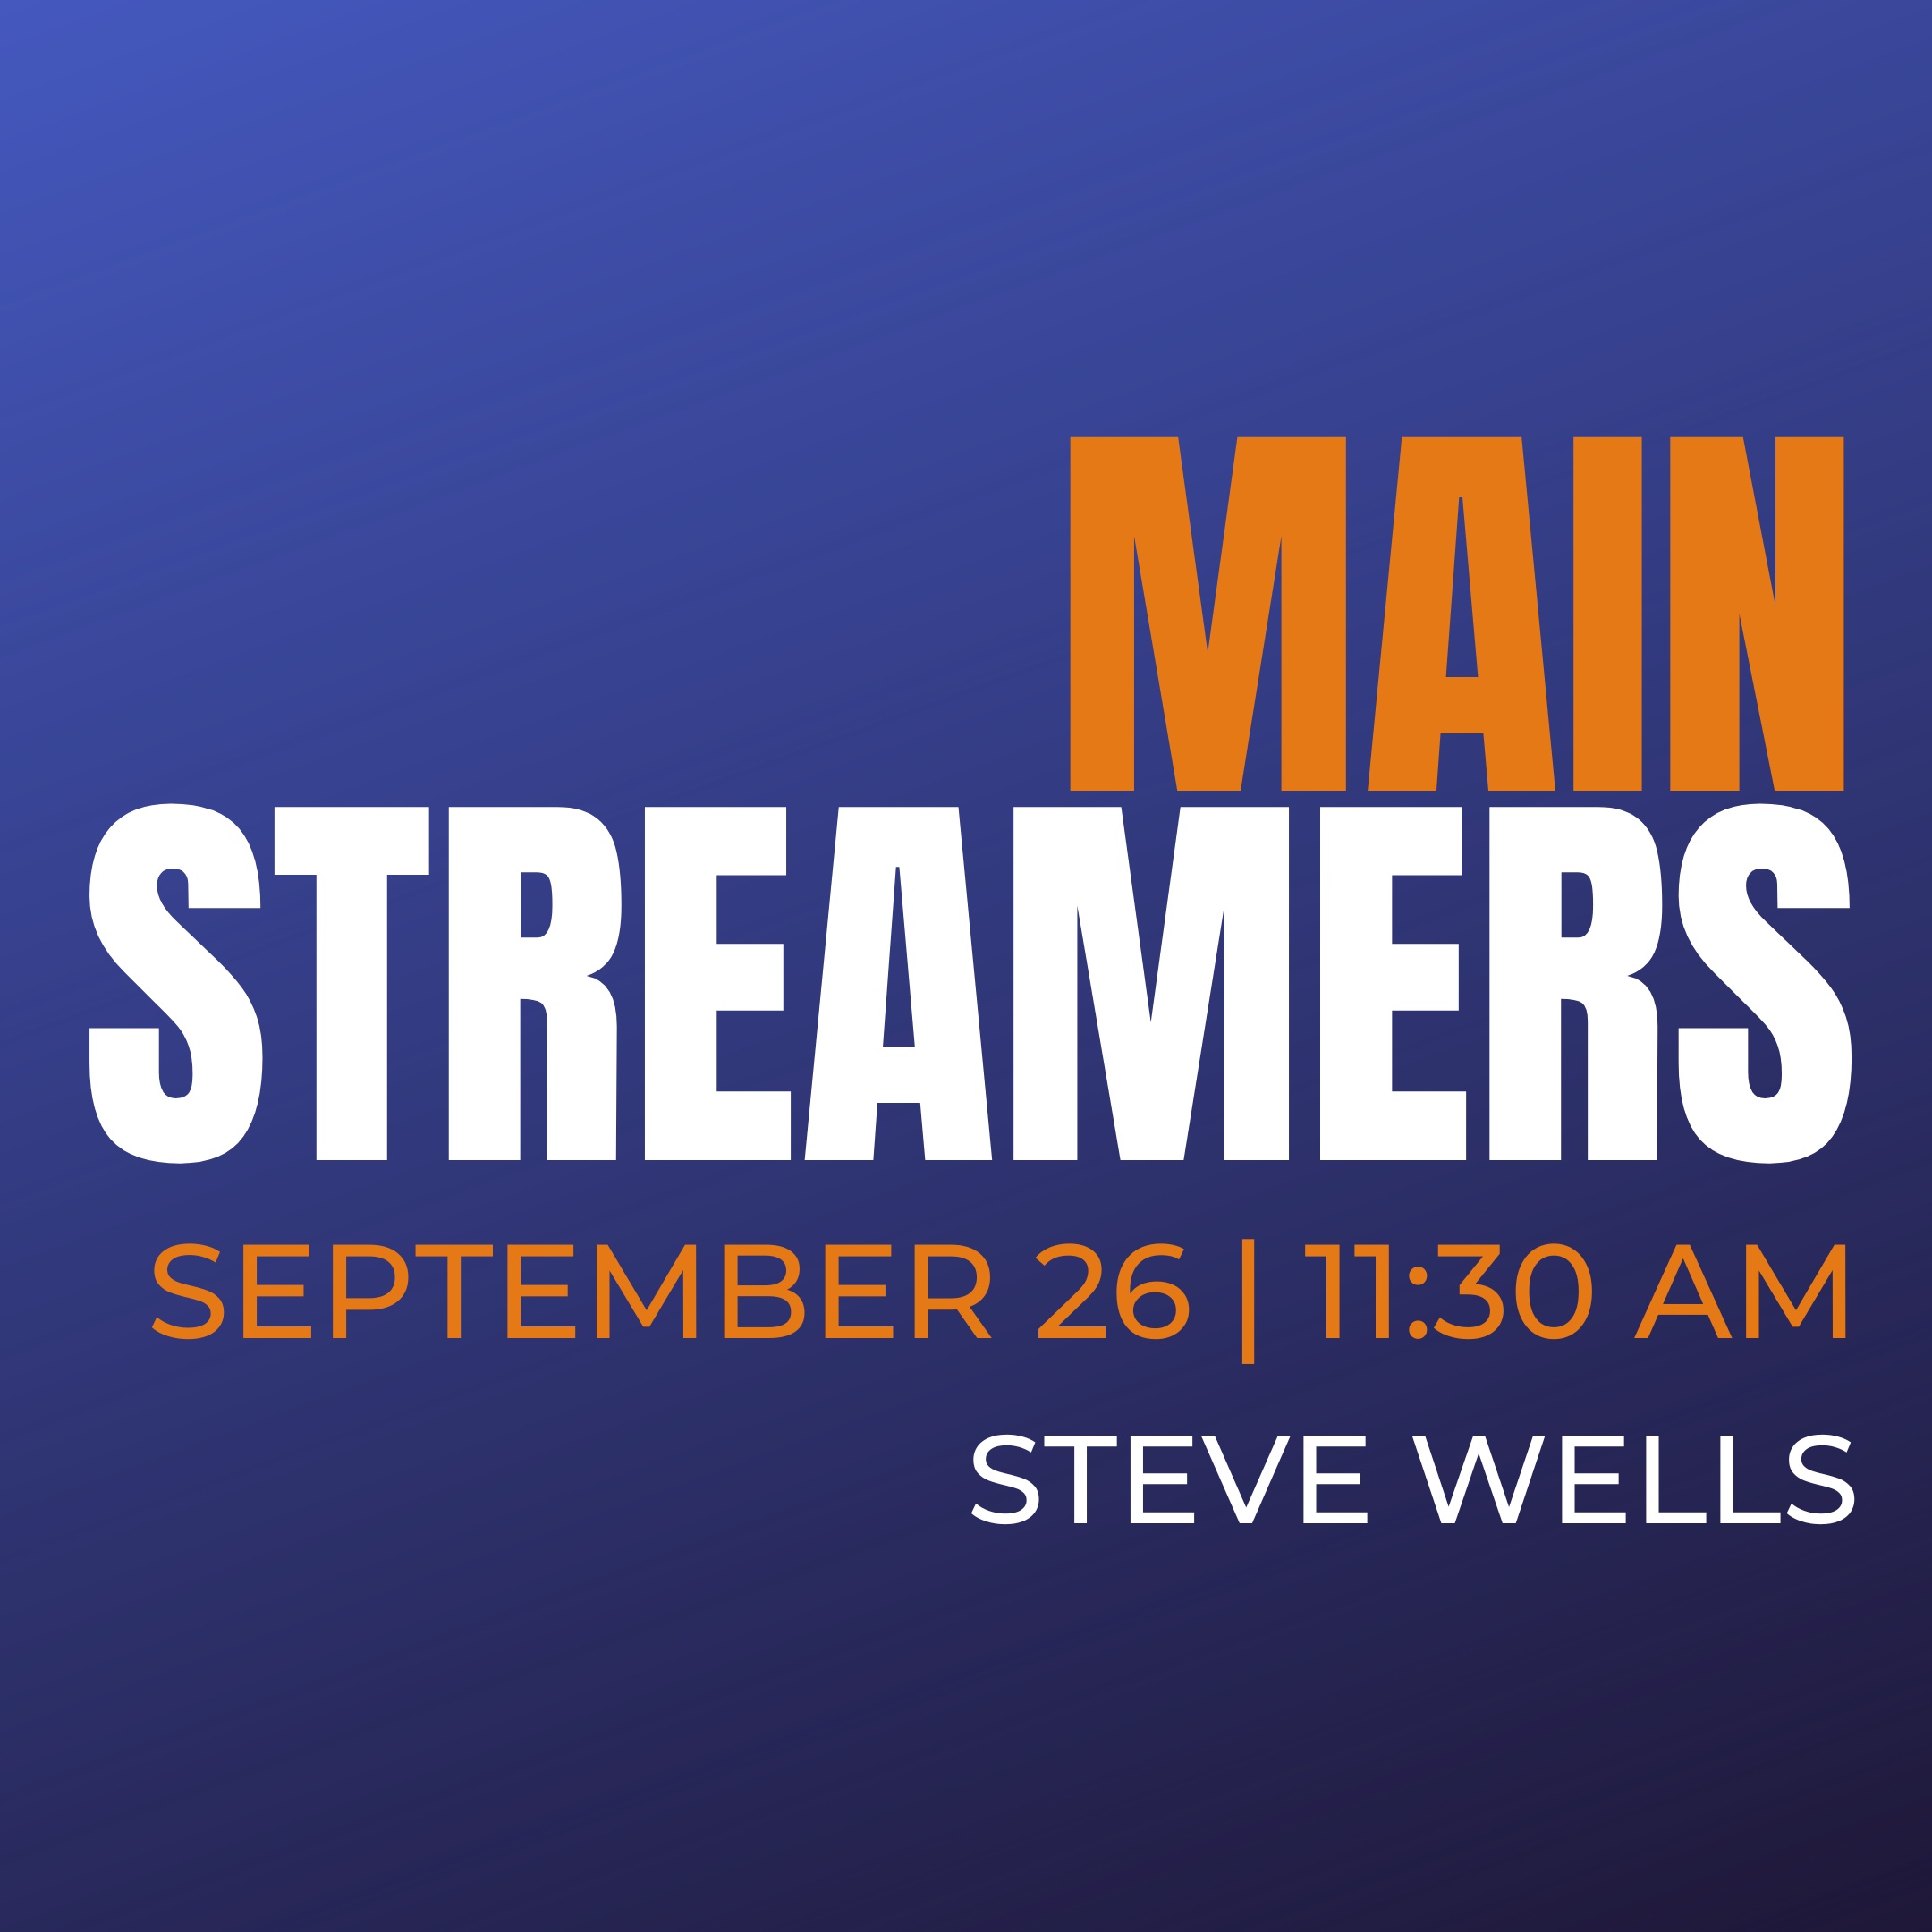 Blue gradient background with the text MainStreamers–Steve Wells written on it